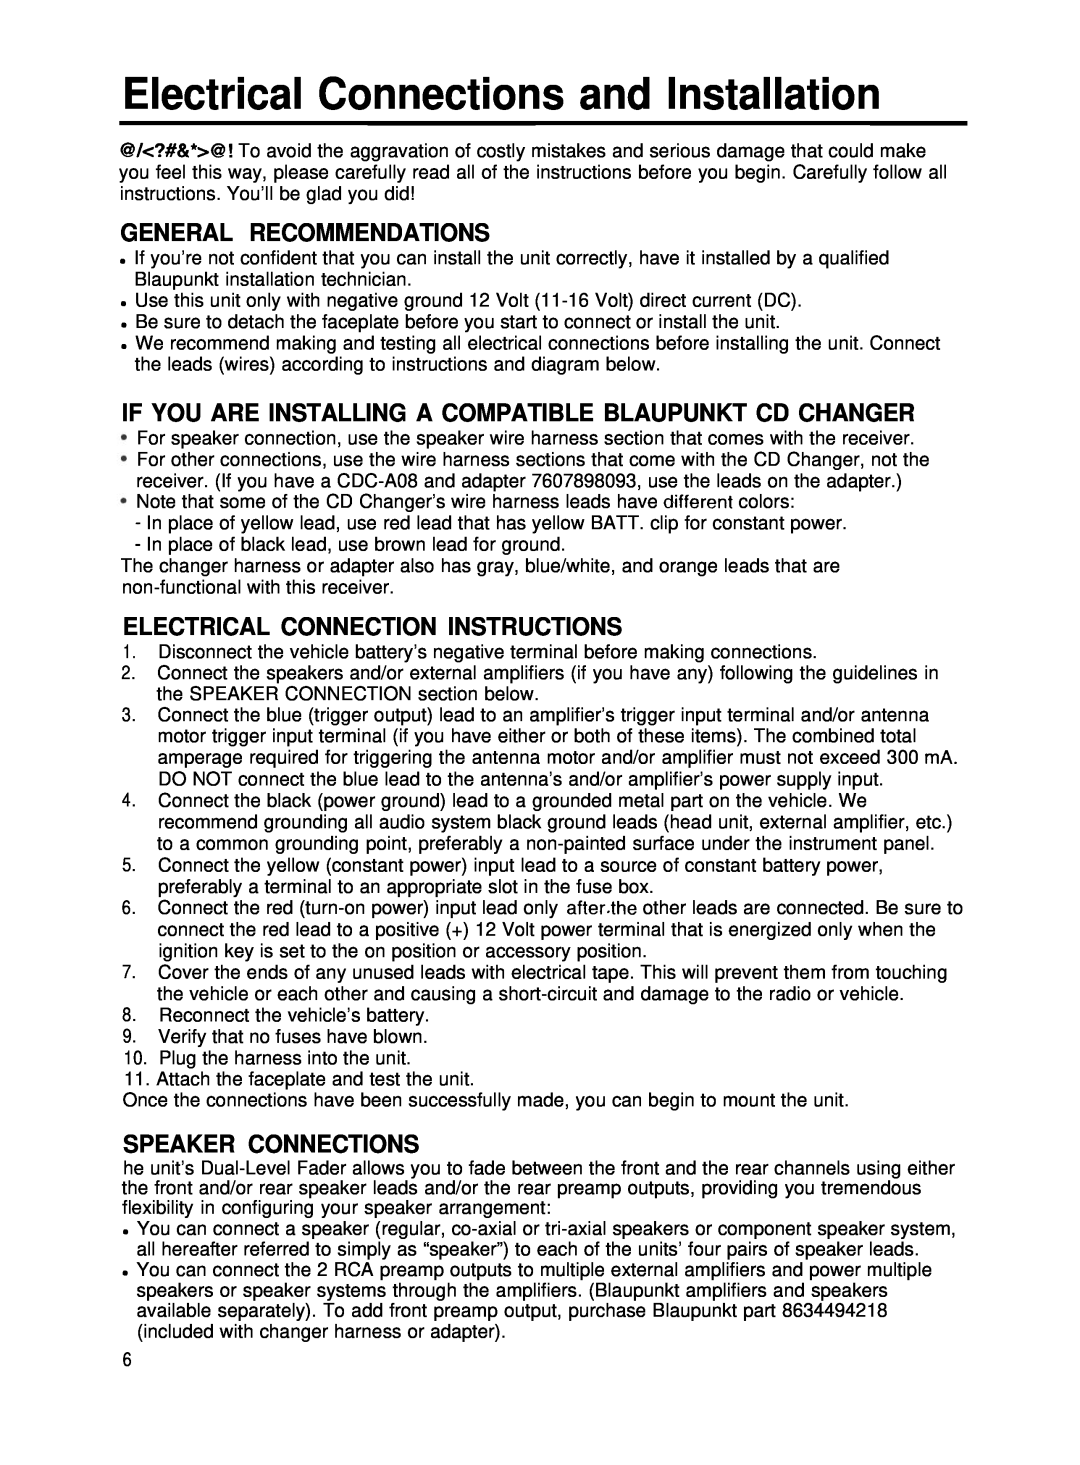 Blaupunkt CR67 manual Electrical Connections and Installation, General Recommendations, Electrical Connection Instructions 